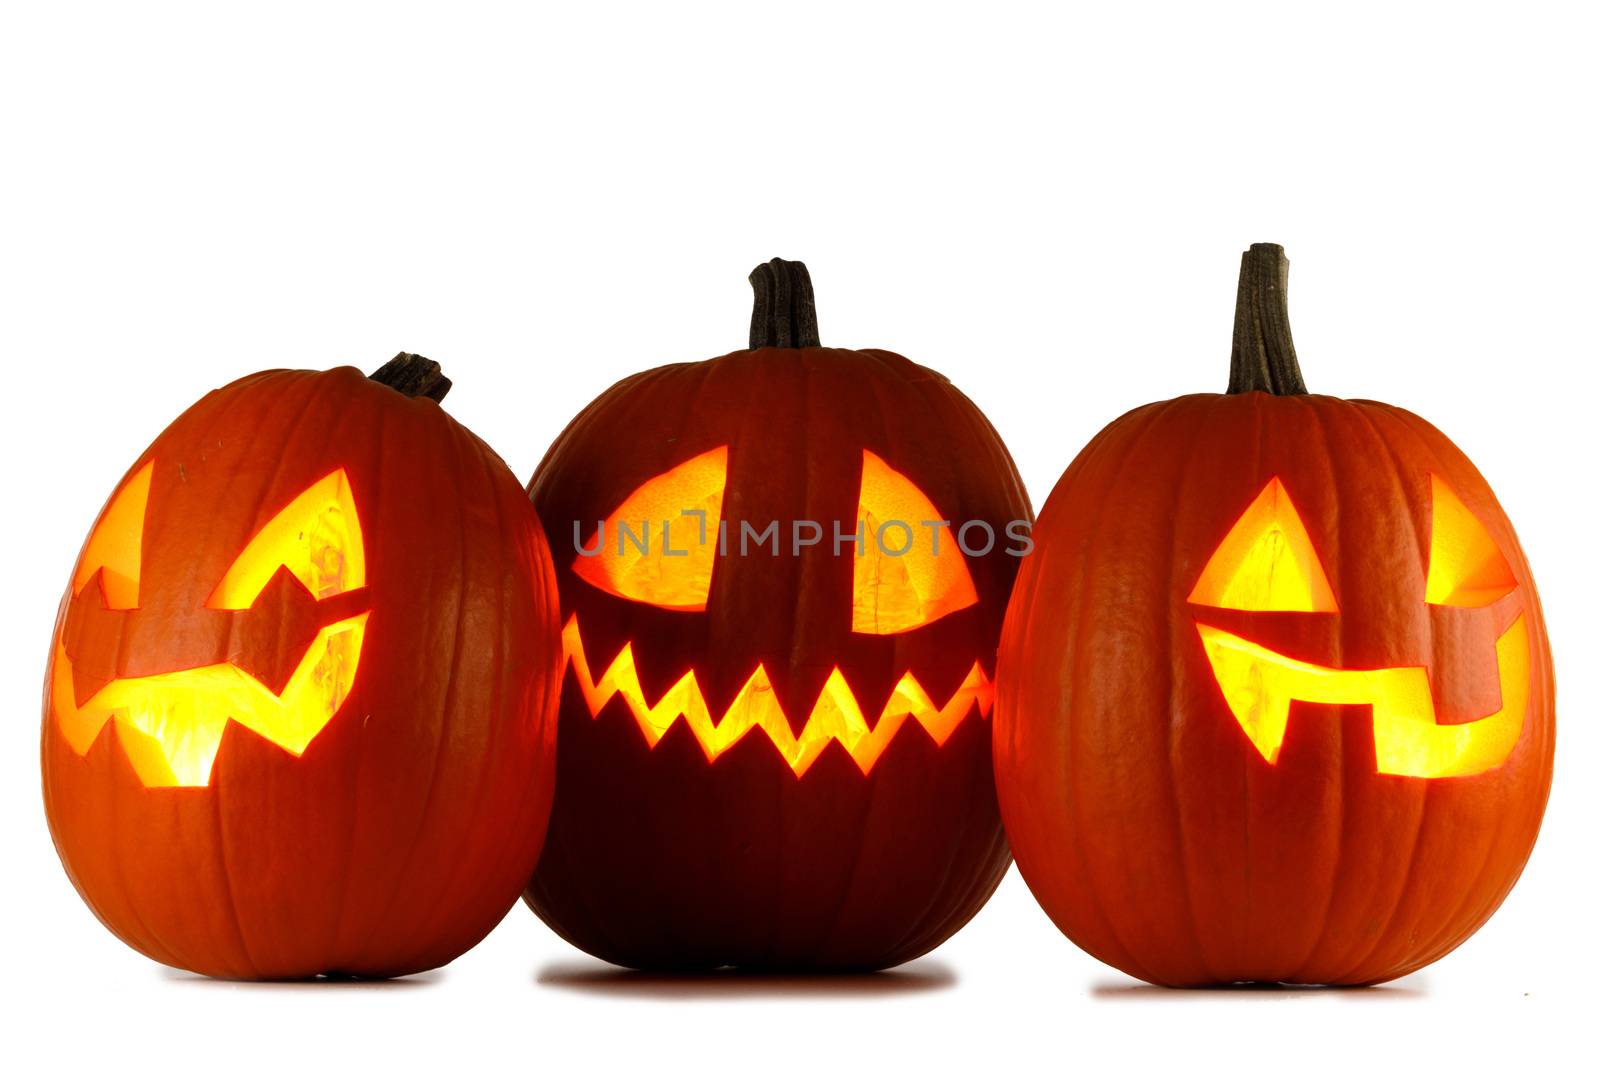 Three Halloween Pumpkins isolated on white background